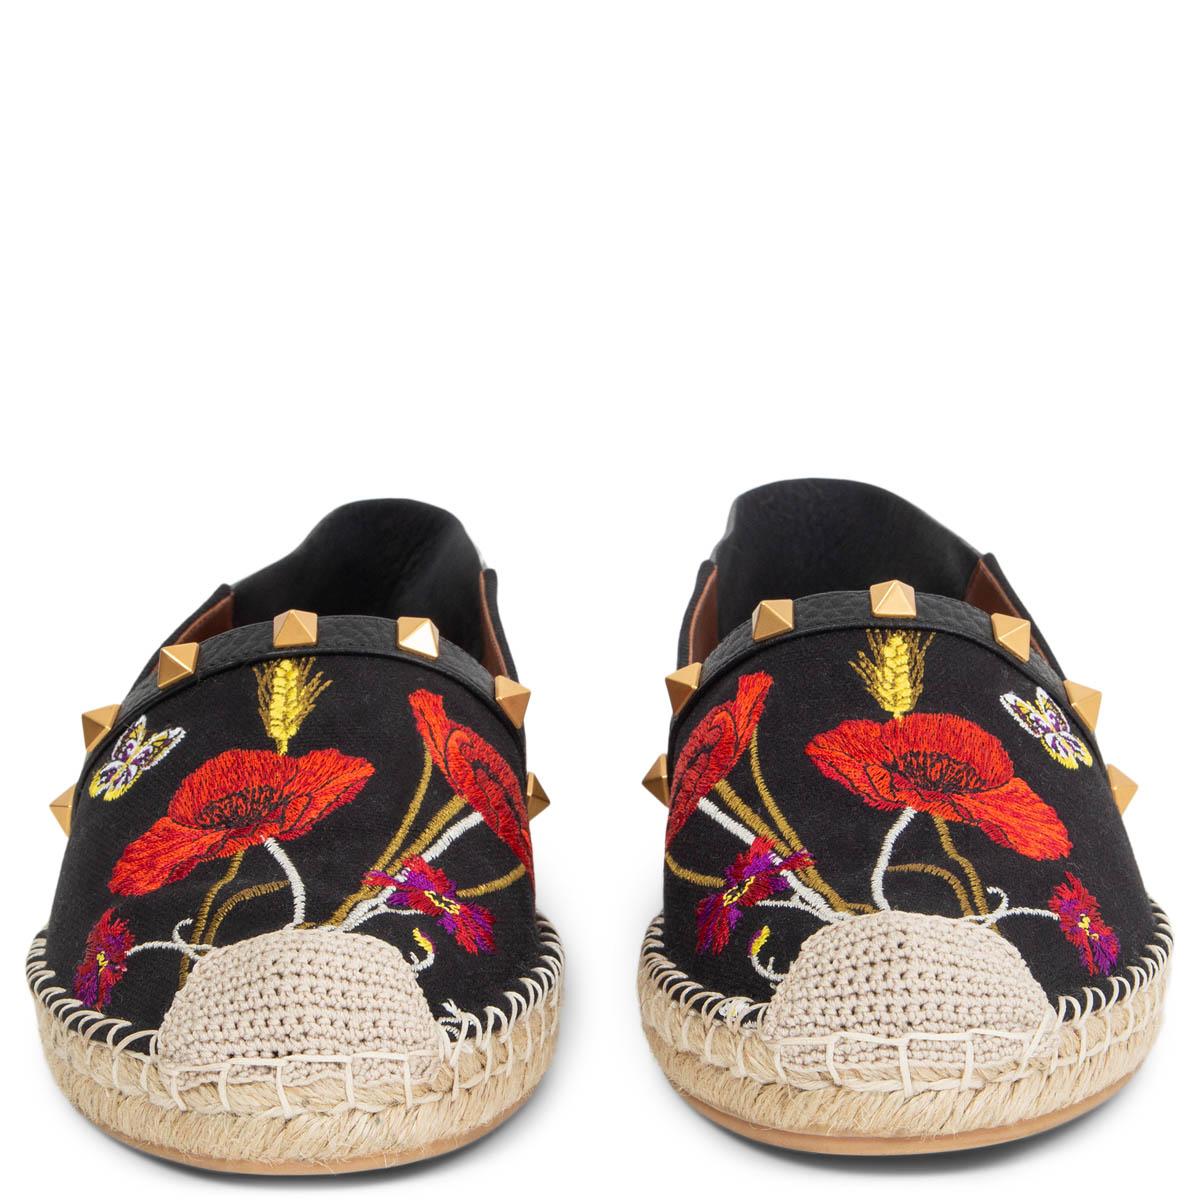 100% authentic Valentino flower and butterfly embroidered slip-on espadrilles in black canvas and leather embellished with gold-tone studs. Have been worn once or twice and are in excellent condition. Come with dust bag. 

Measurements
Imprinted